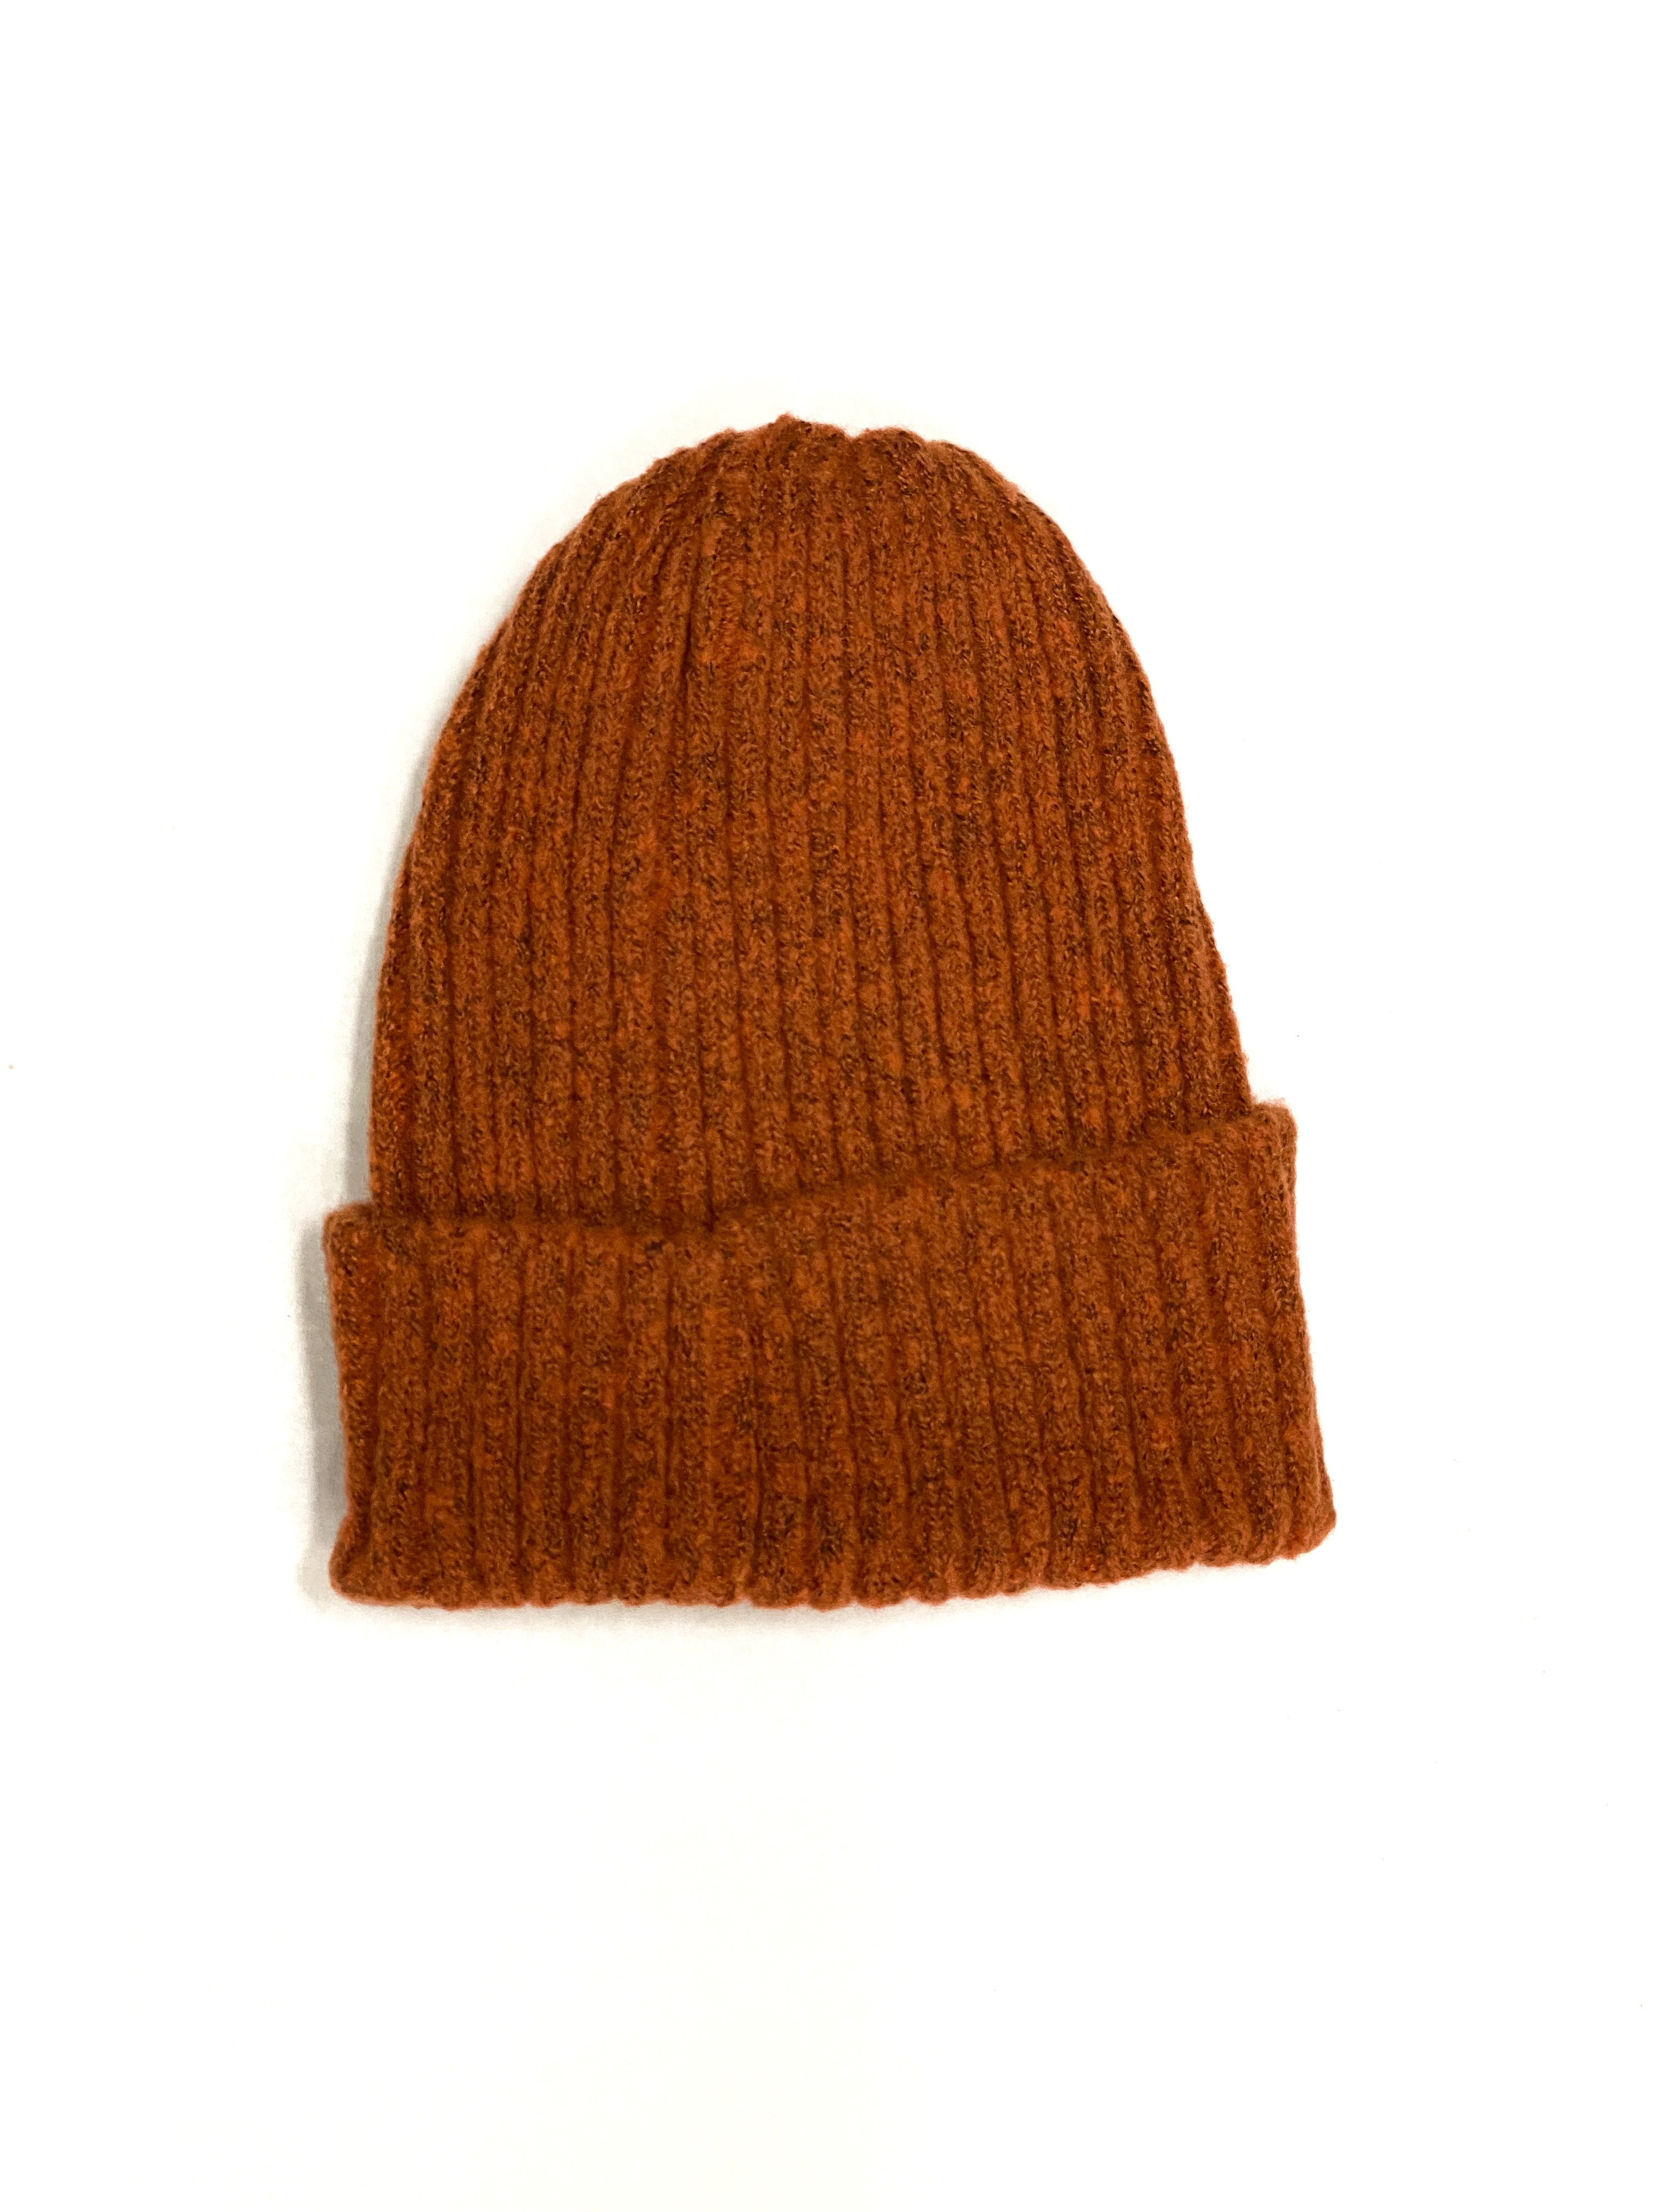 Time Changes Beanie